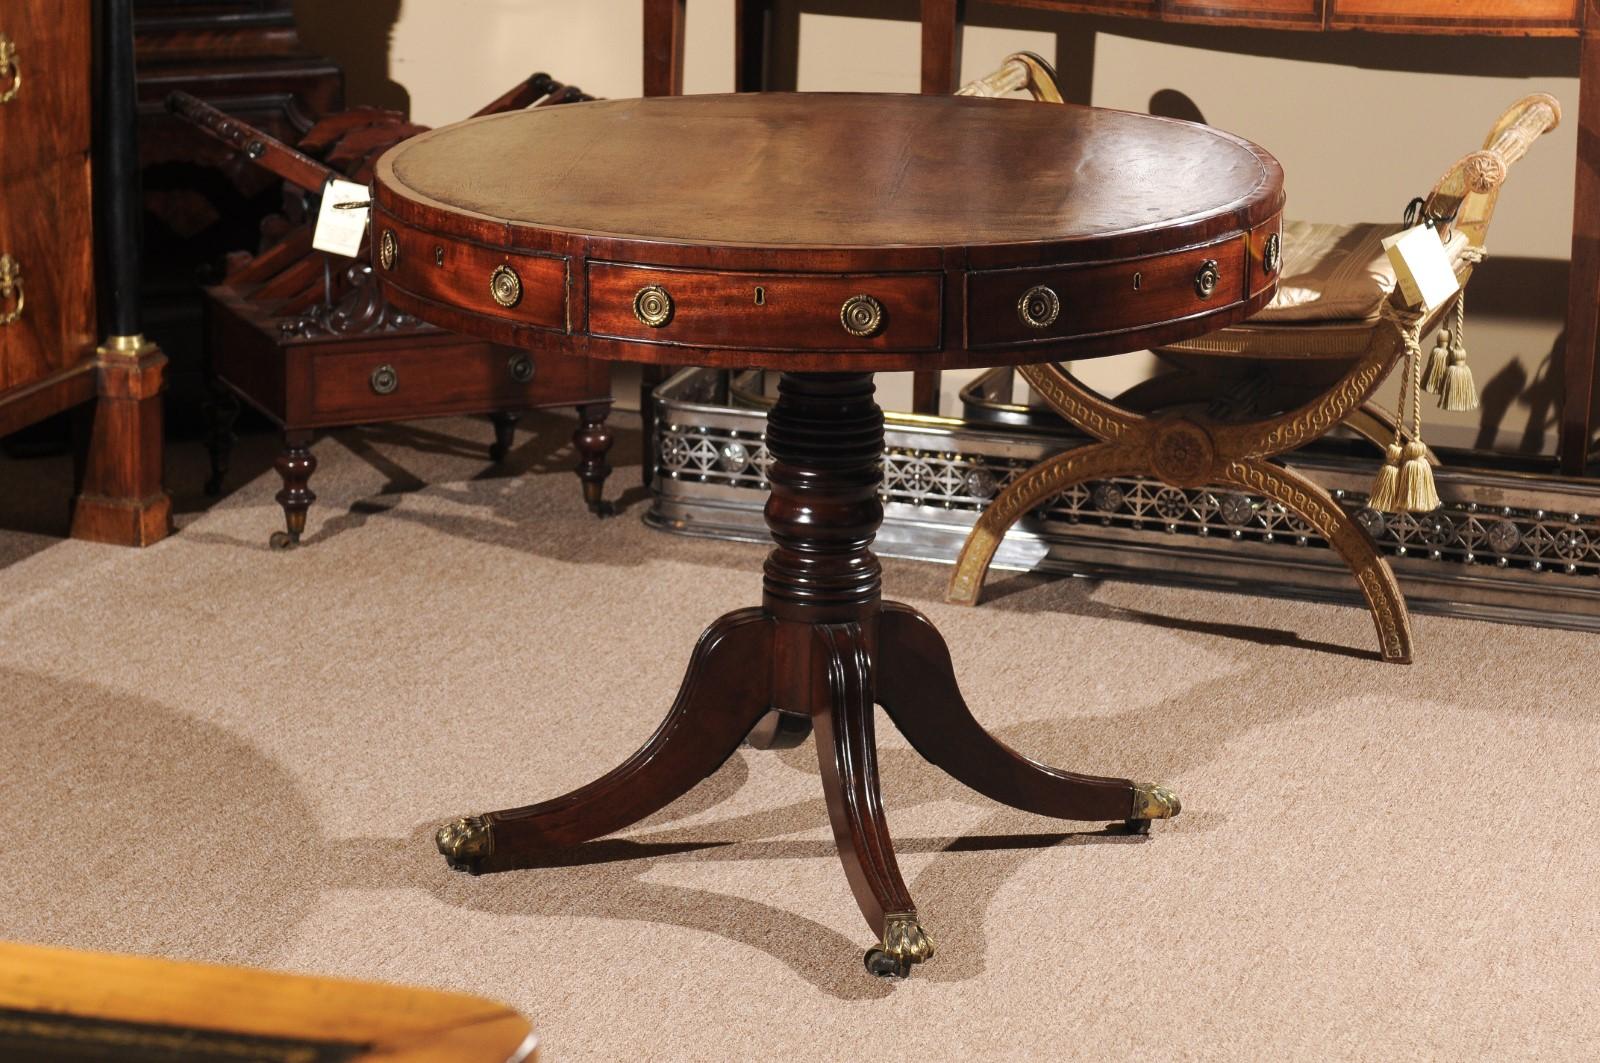 The Regency drum table with brown leather top, 4 sliding drawers and 4 false drawers, turned pedestal below terminating in 4 splayed legs with brass paw castors. 

 